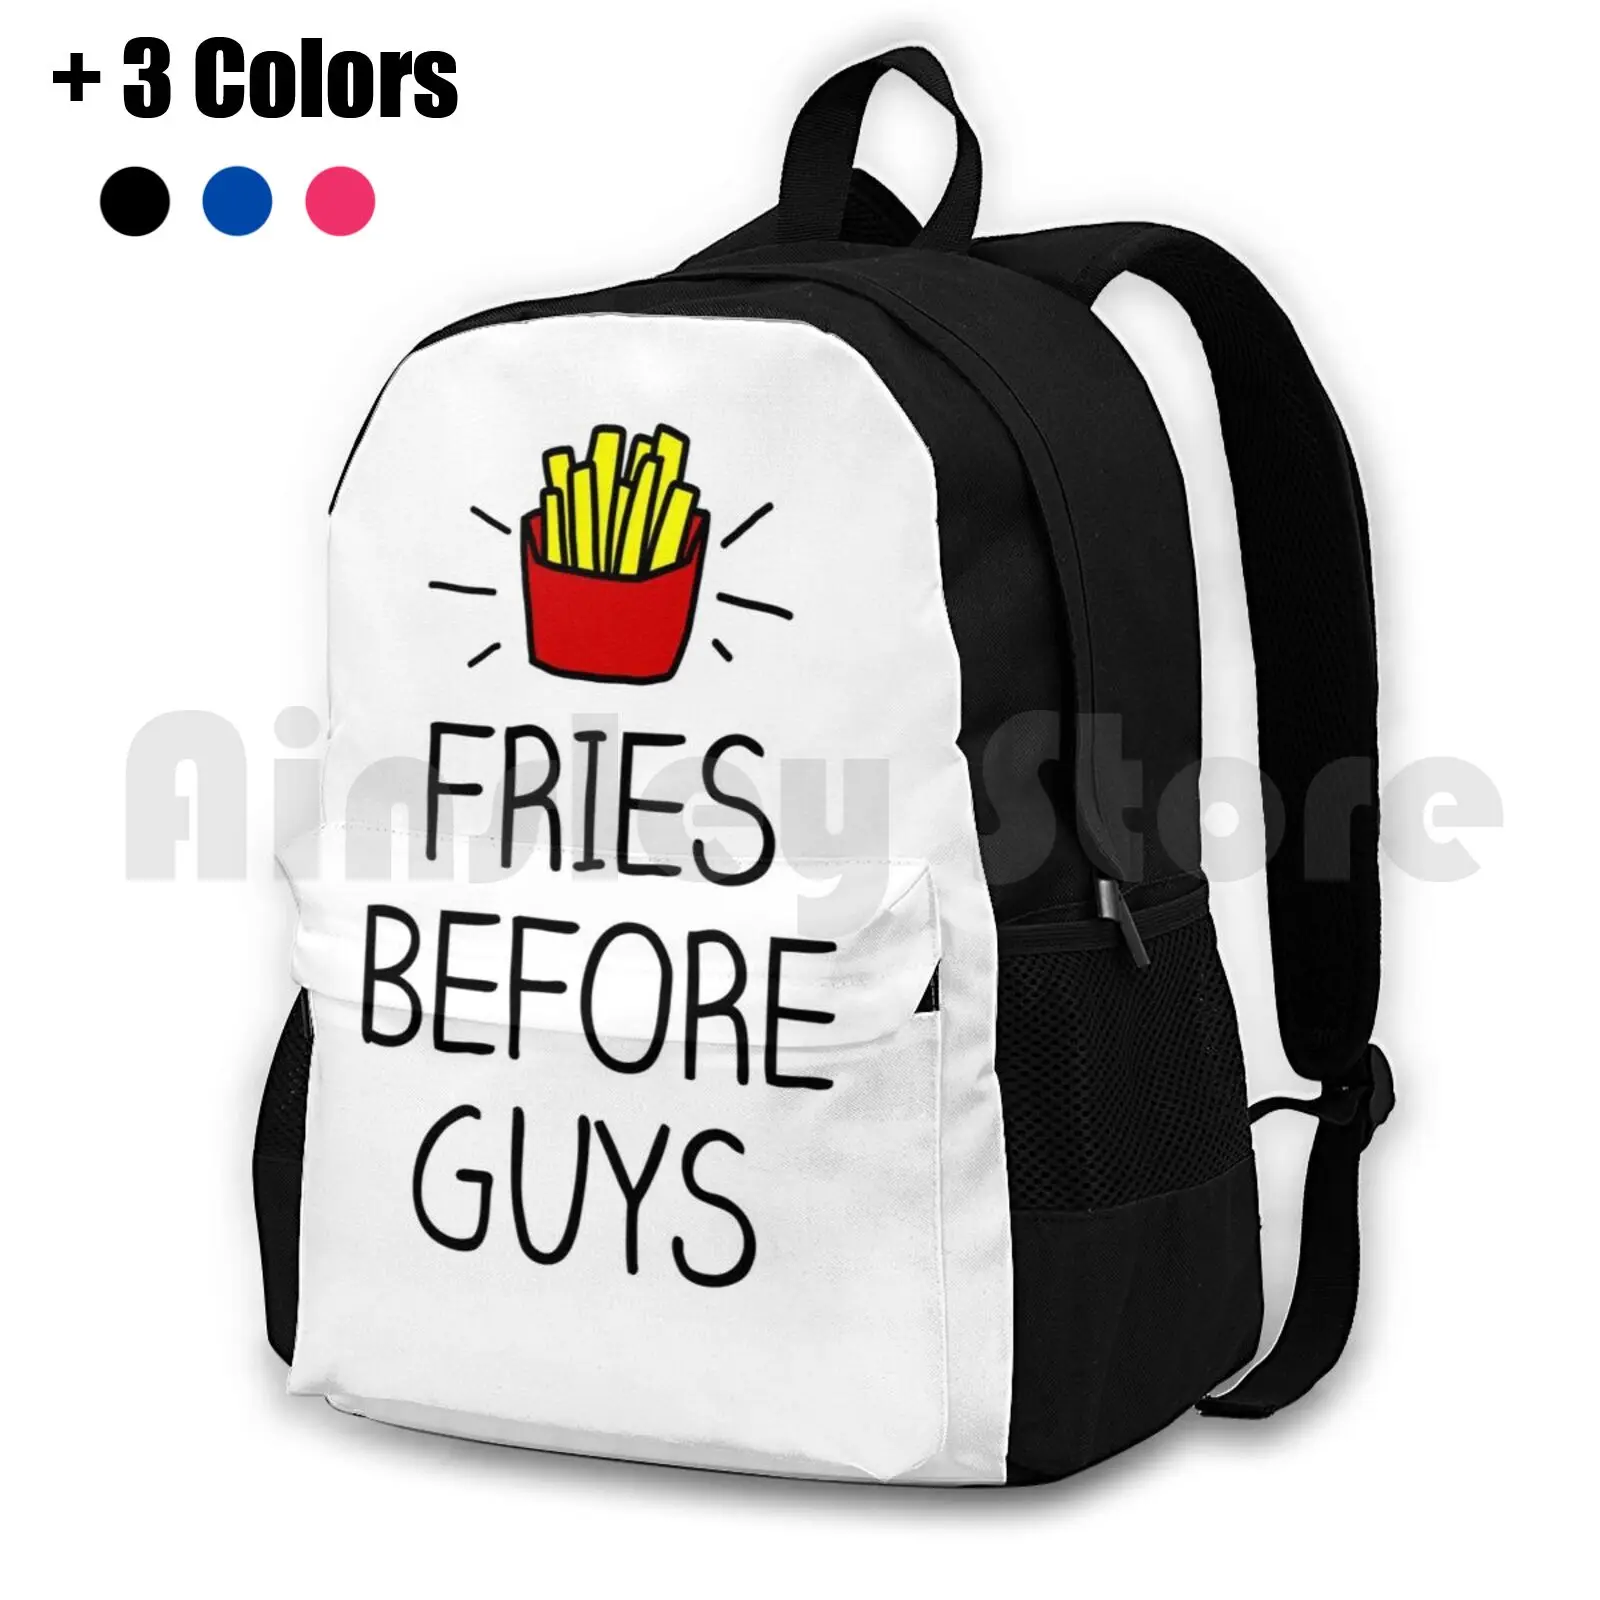 

Fries Before Guys-In Living Color Outdoor Hiking Backpack Waterproof Camping Travel Fries Guys Boys Funny Jokes Eating Cool